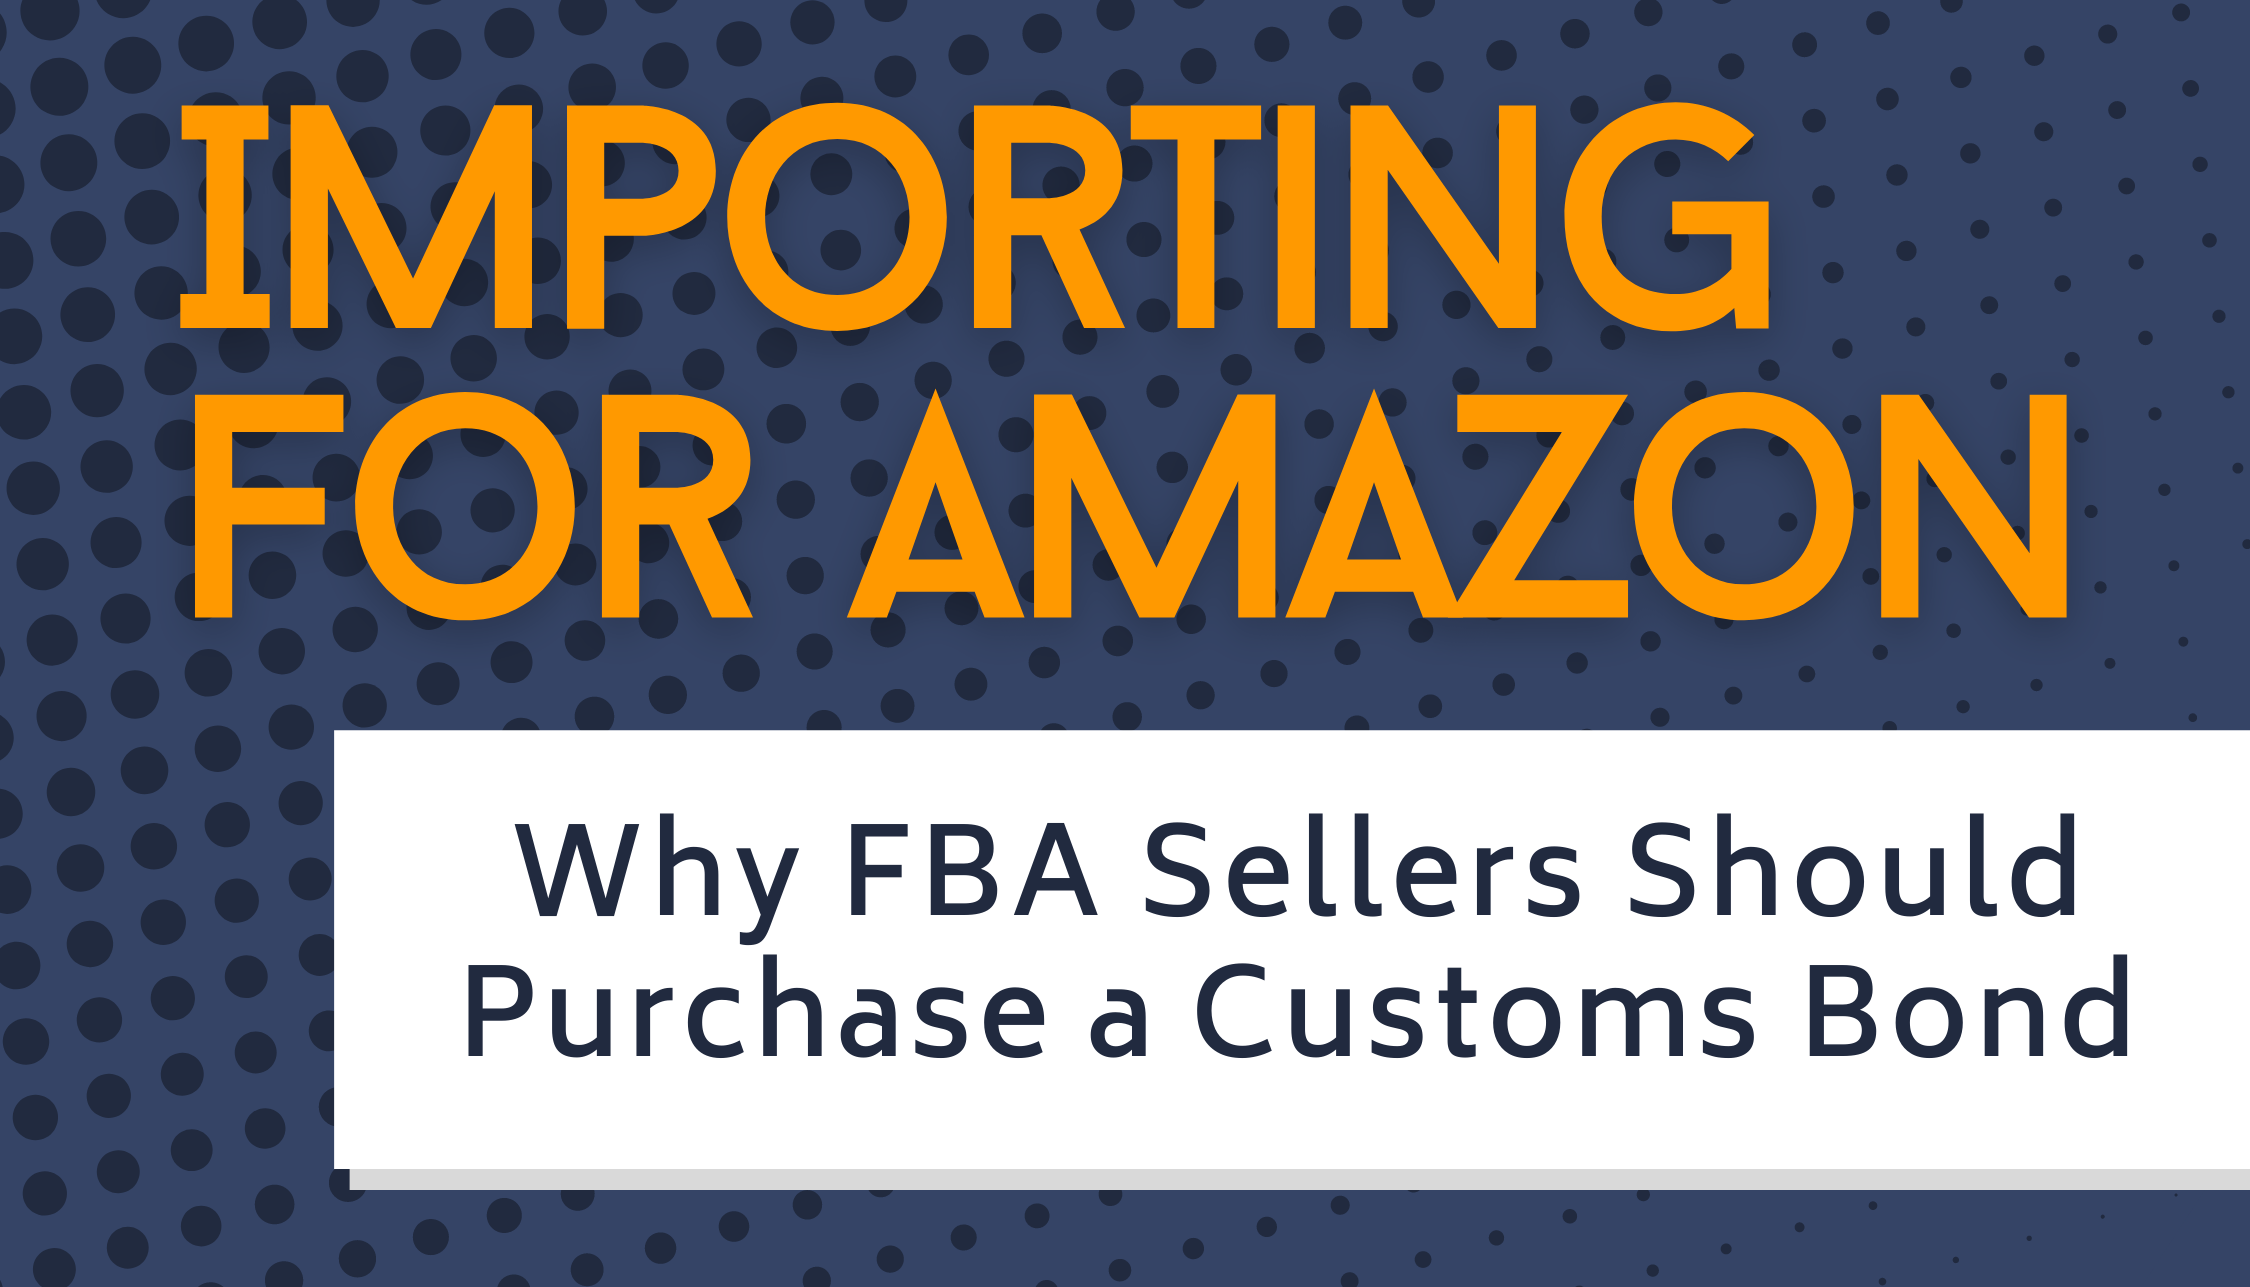 Why FBA Sellers Should Purchase a Customs Bond